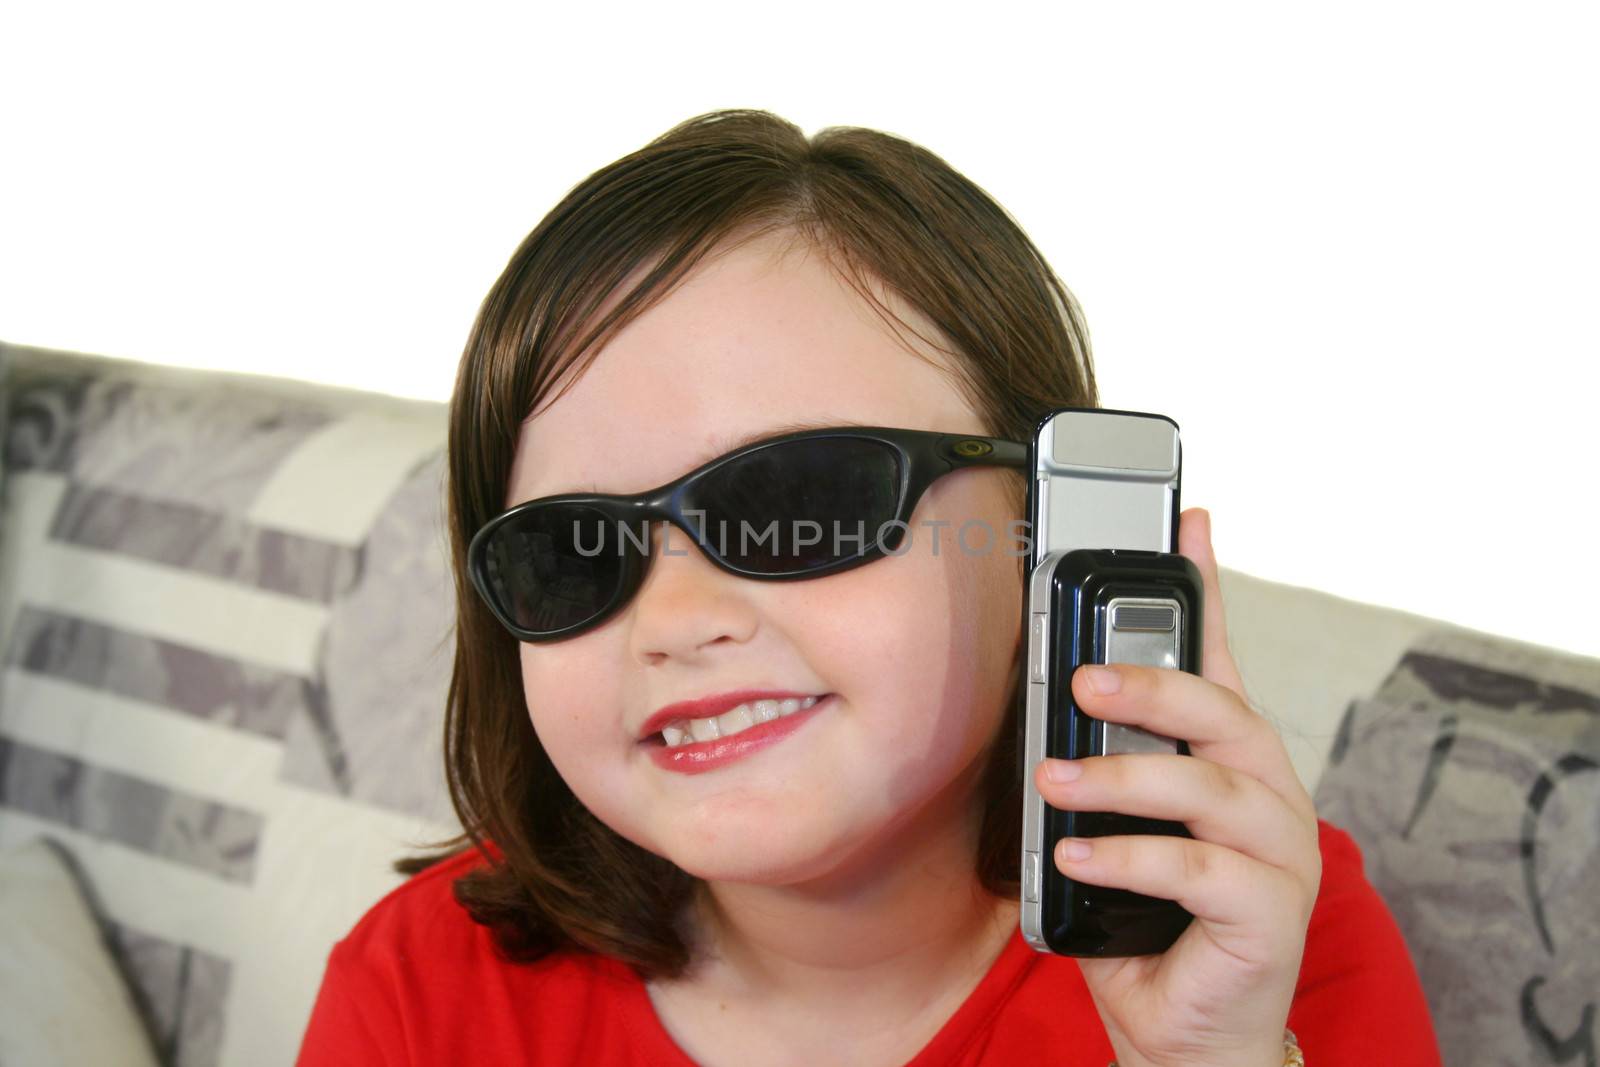 Little girl with sunglasses holds up her cell phone.